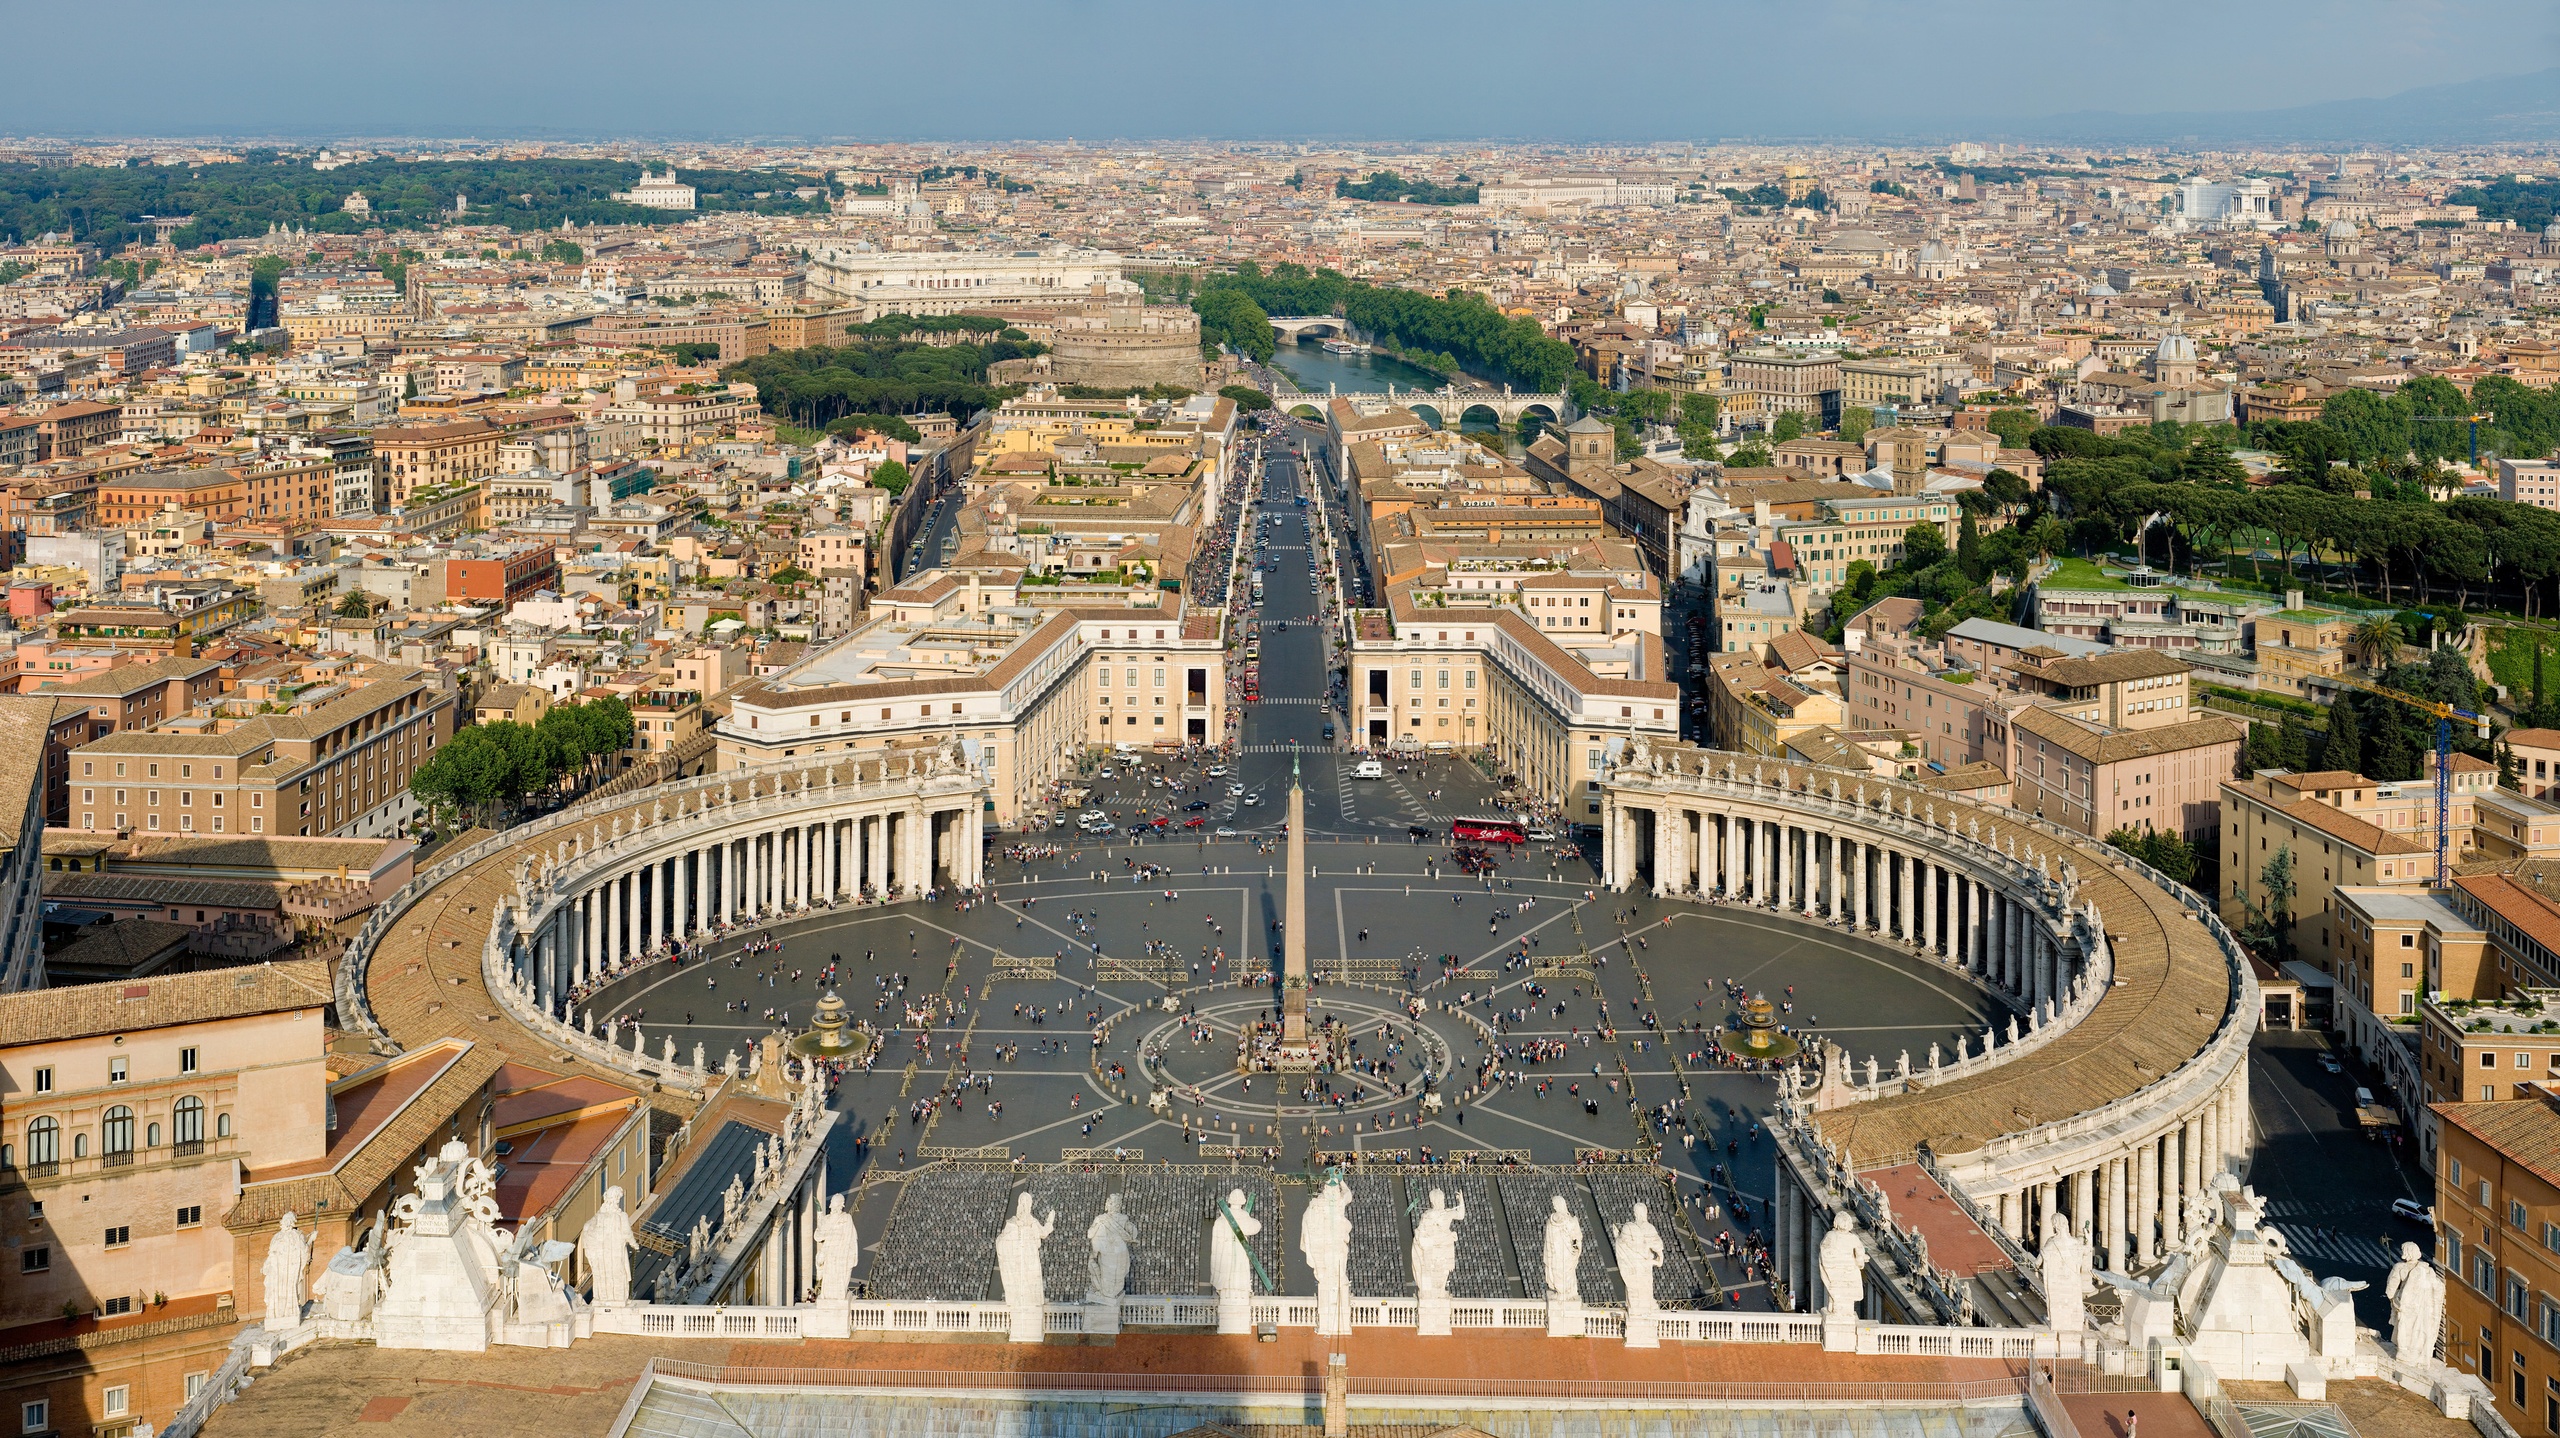 Fantastic Once-in-a-lifetime Day Tour in Rome by Visiting the Vatican Museums, including the Sistine Chapel and St. Peter’s Basilica, Colosseum 